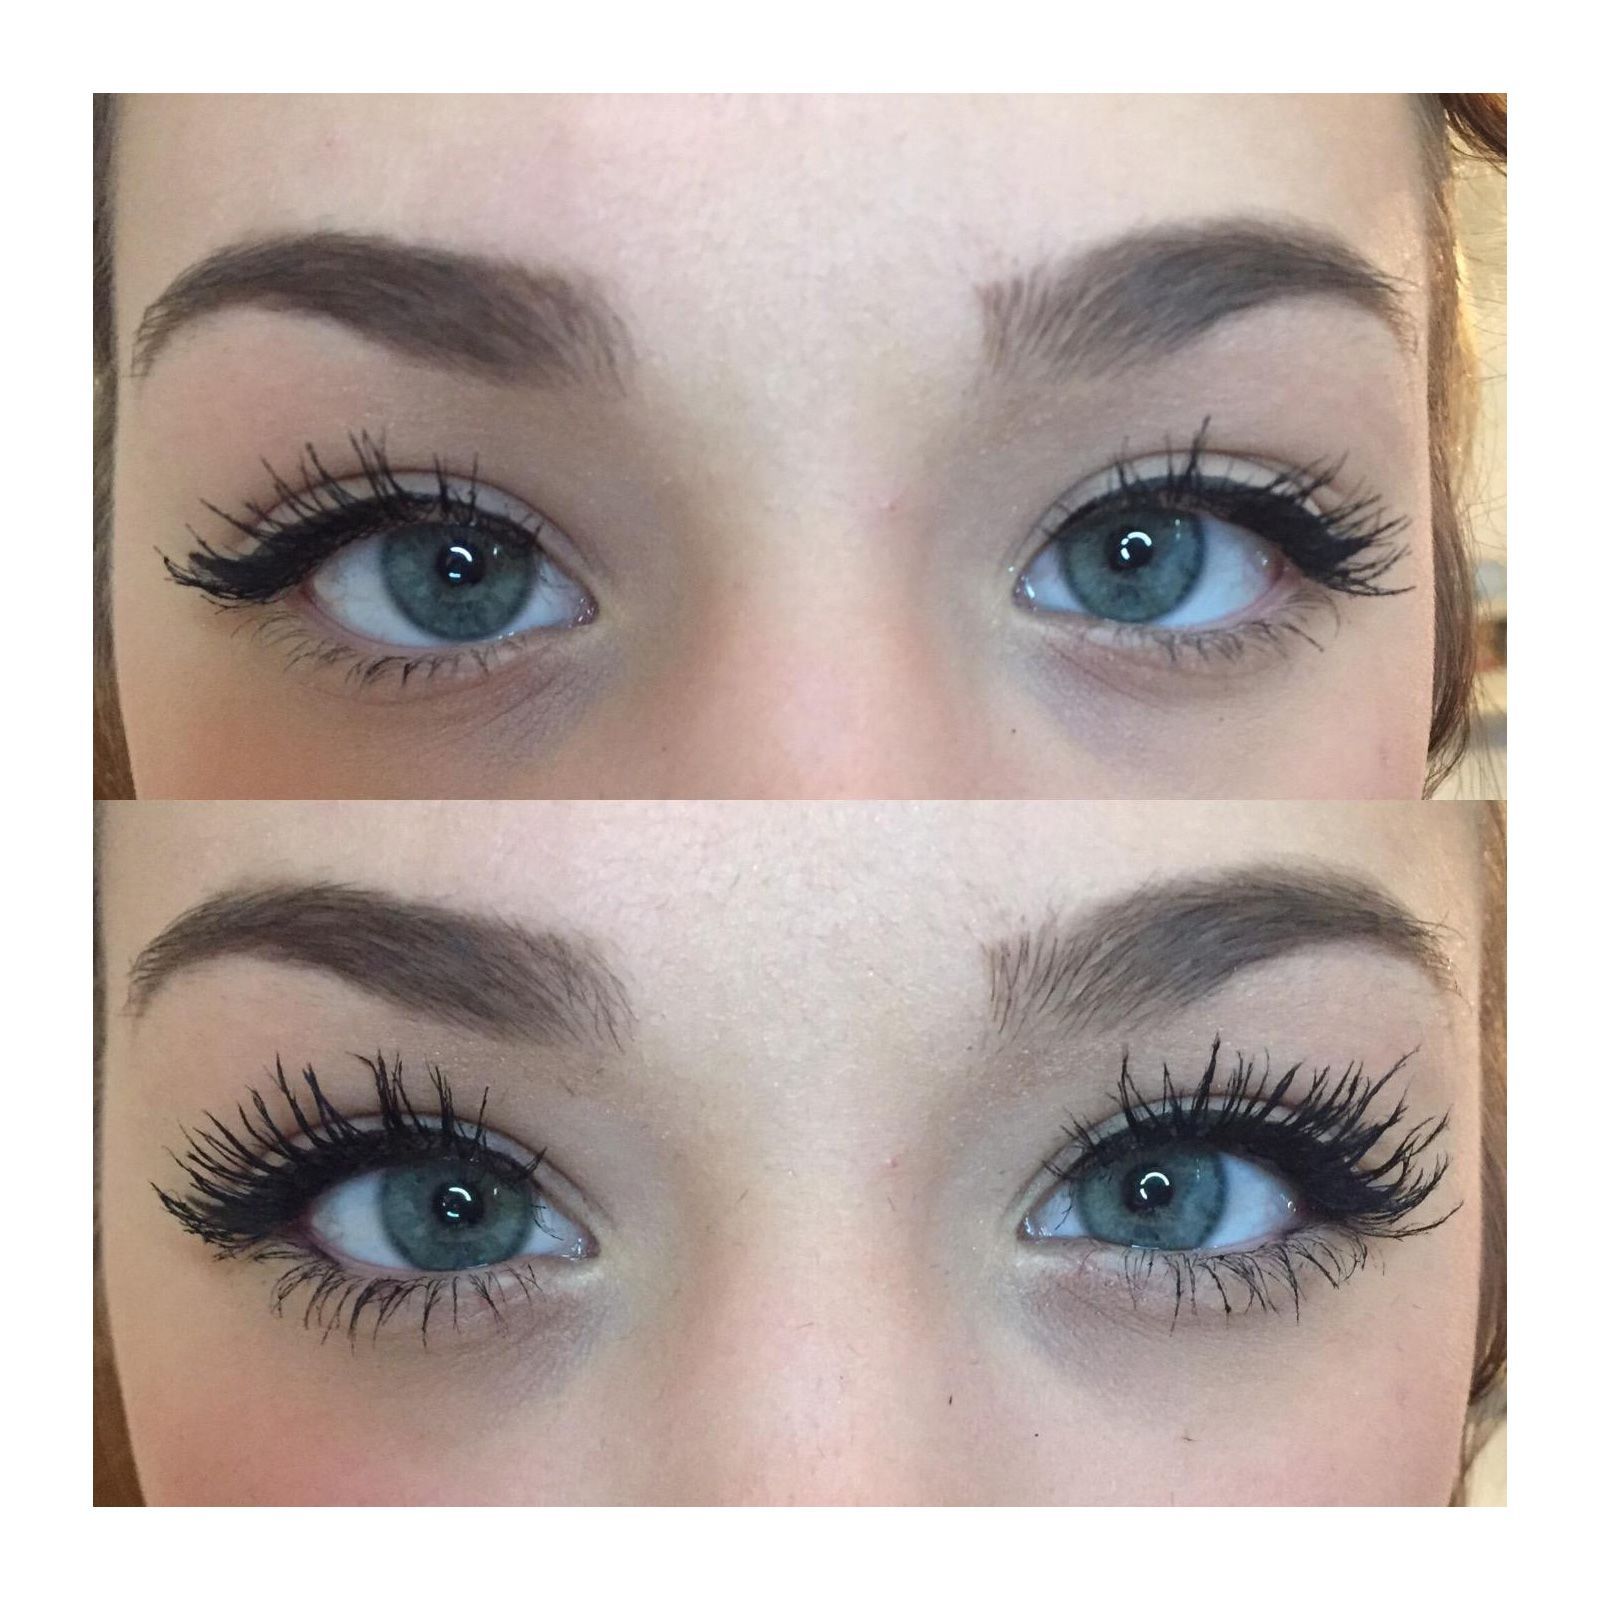 This $20 Beauty Hack Will Give You Salon-Quality Lashes - This $20 Beauty Hack Will Give You Salon-Quality Lashes -   19 beauty Hacks lashes ideas